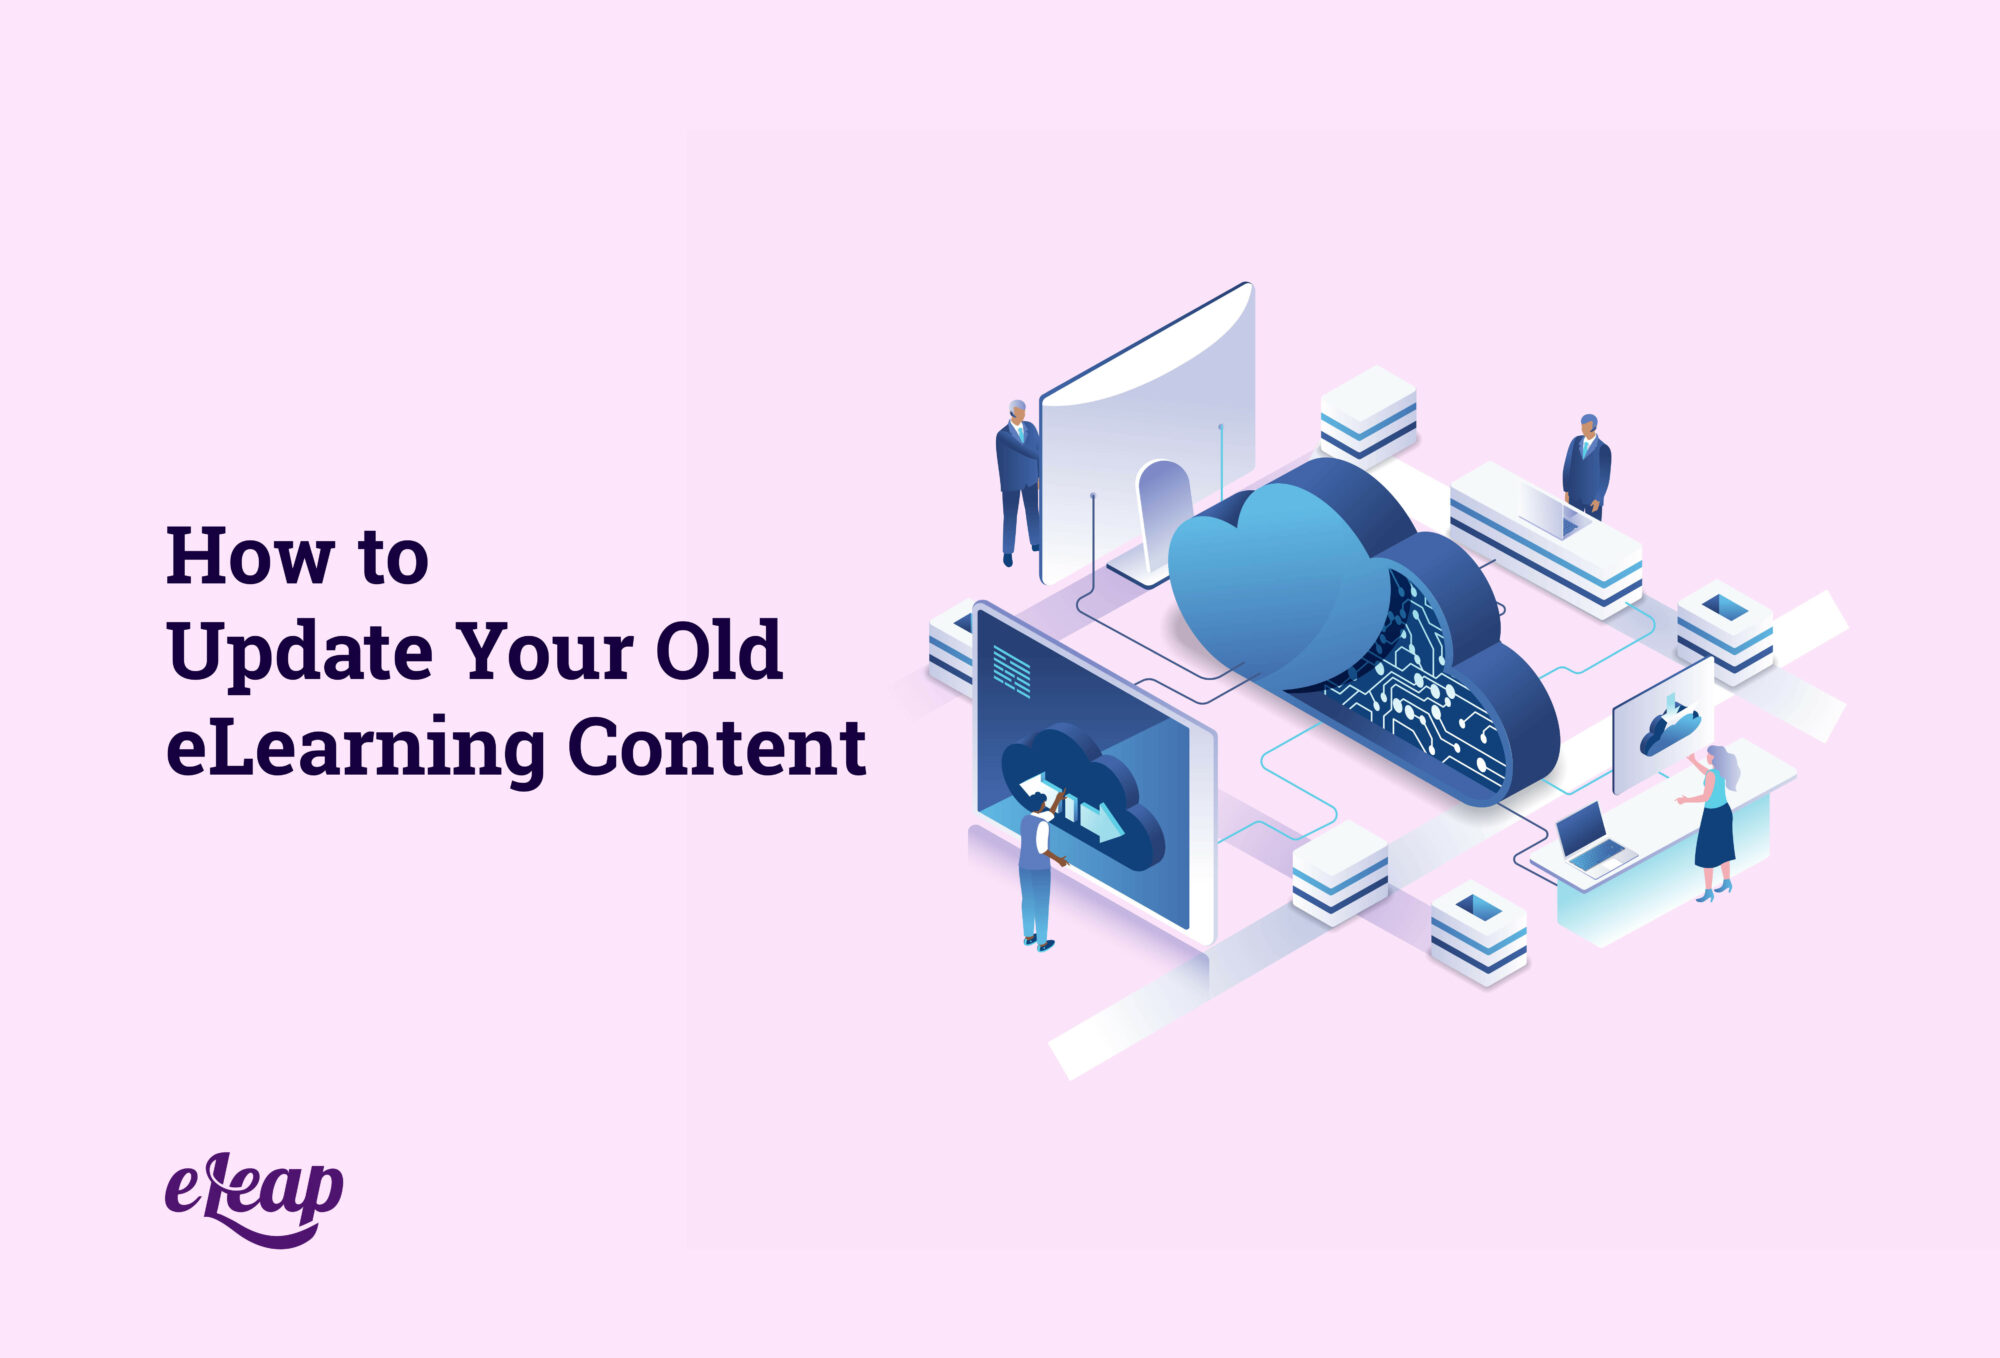 How to Update Your Old eLearning Content